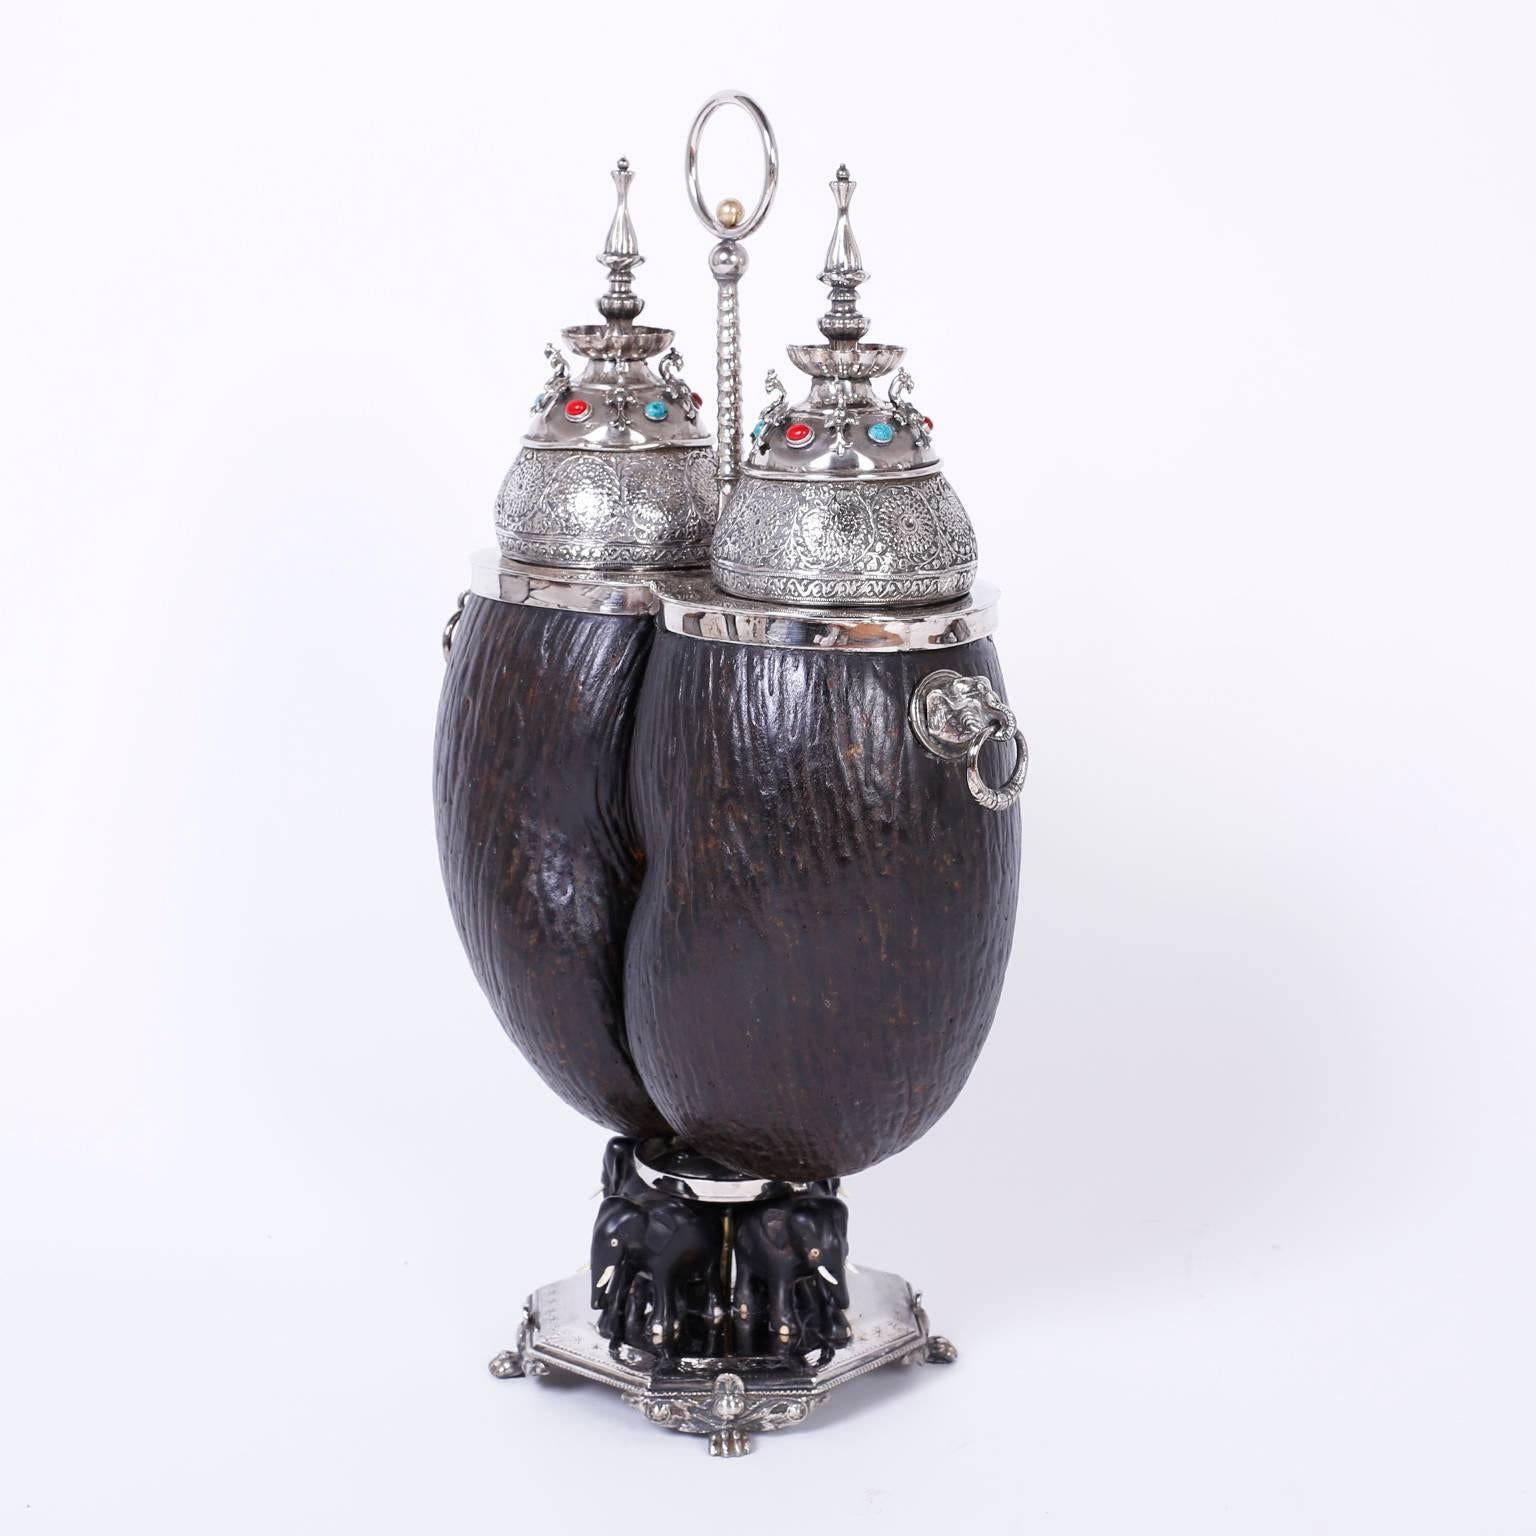 The coco de mer is rare double lobe nut from the Seychelles Islands with mystical properties. This example is now a luxurious tea caddy that has silver metal lids with exotic finials, hand-hammered floral designs, phoenix birds, semi precious stones